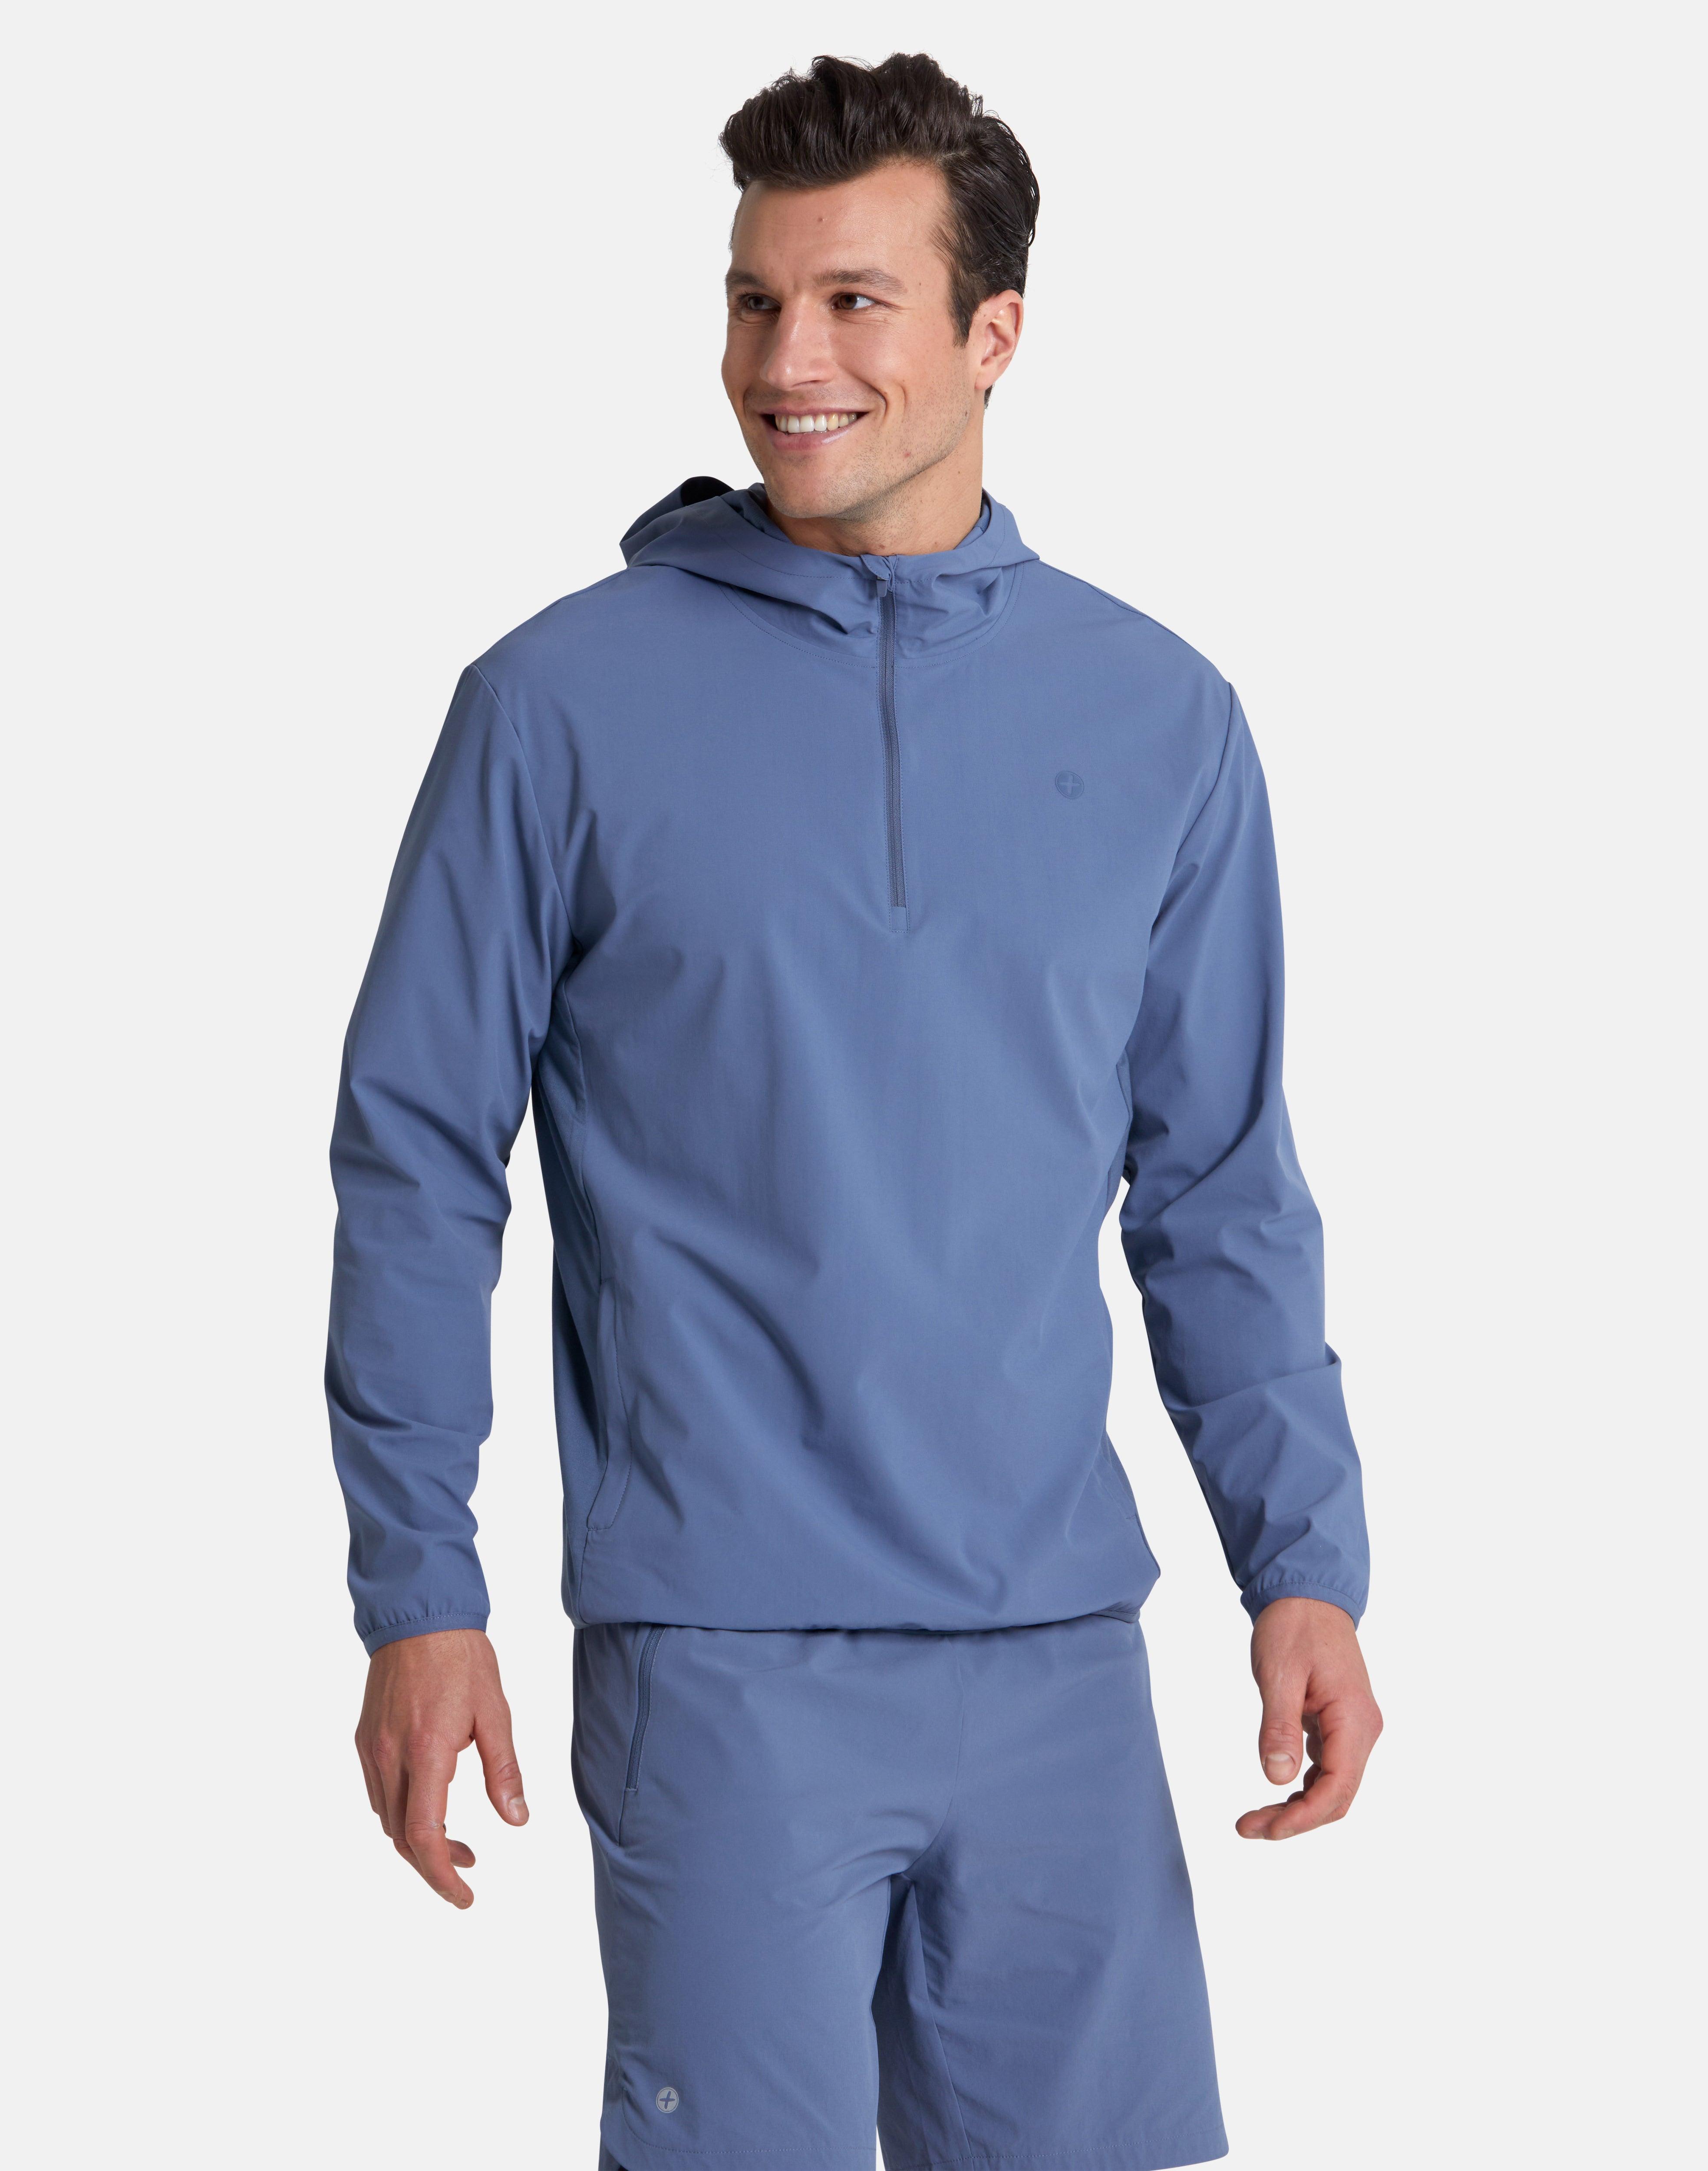 Adaptive 1/2 Zip Jacket in Thunder Blue - Outerwear - Gym+Coffee